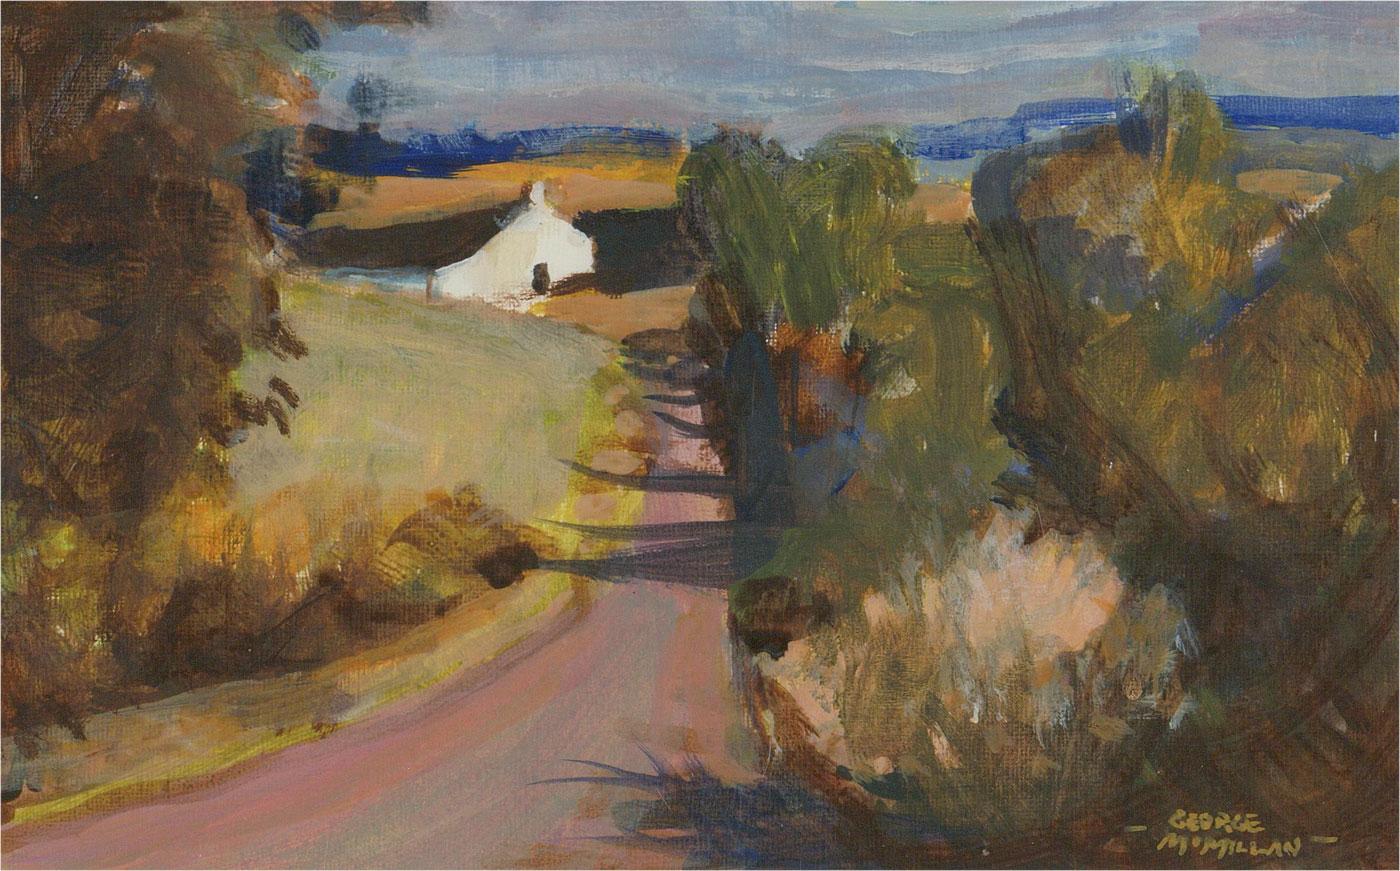 A wonderful colourist landscape by the Scottish artist George McMillan depicting a winding country road. With bold colour and expressive brushwork, this fine contemporary study is well presented in a white card mount and vintage gilt frame. Signed.